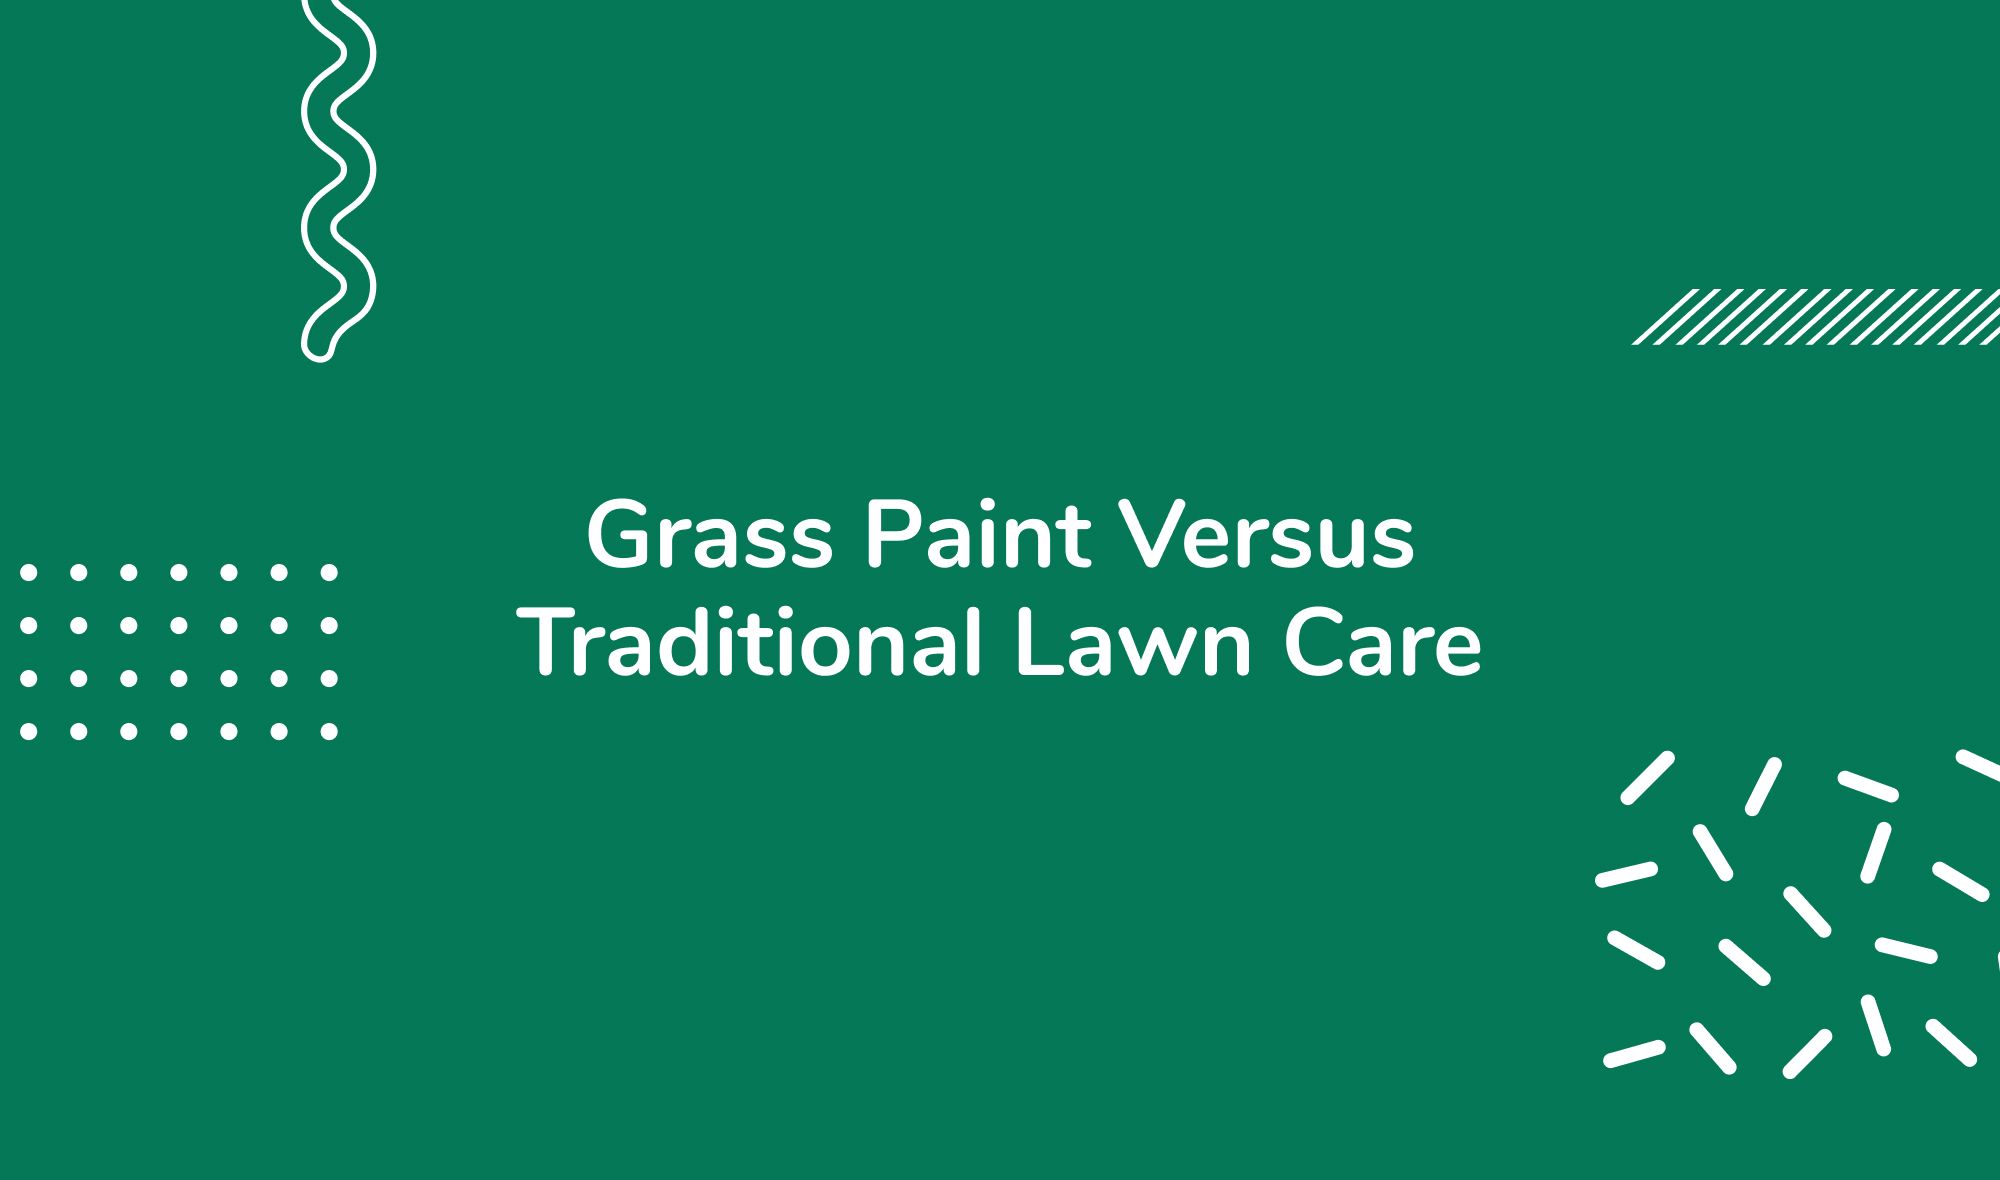 Grass Paint Versus Traditional Lawn Care: A Comparative Analysis